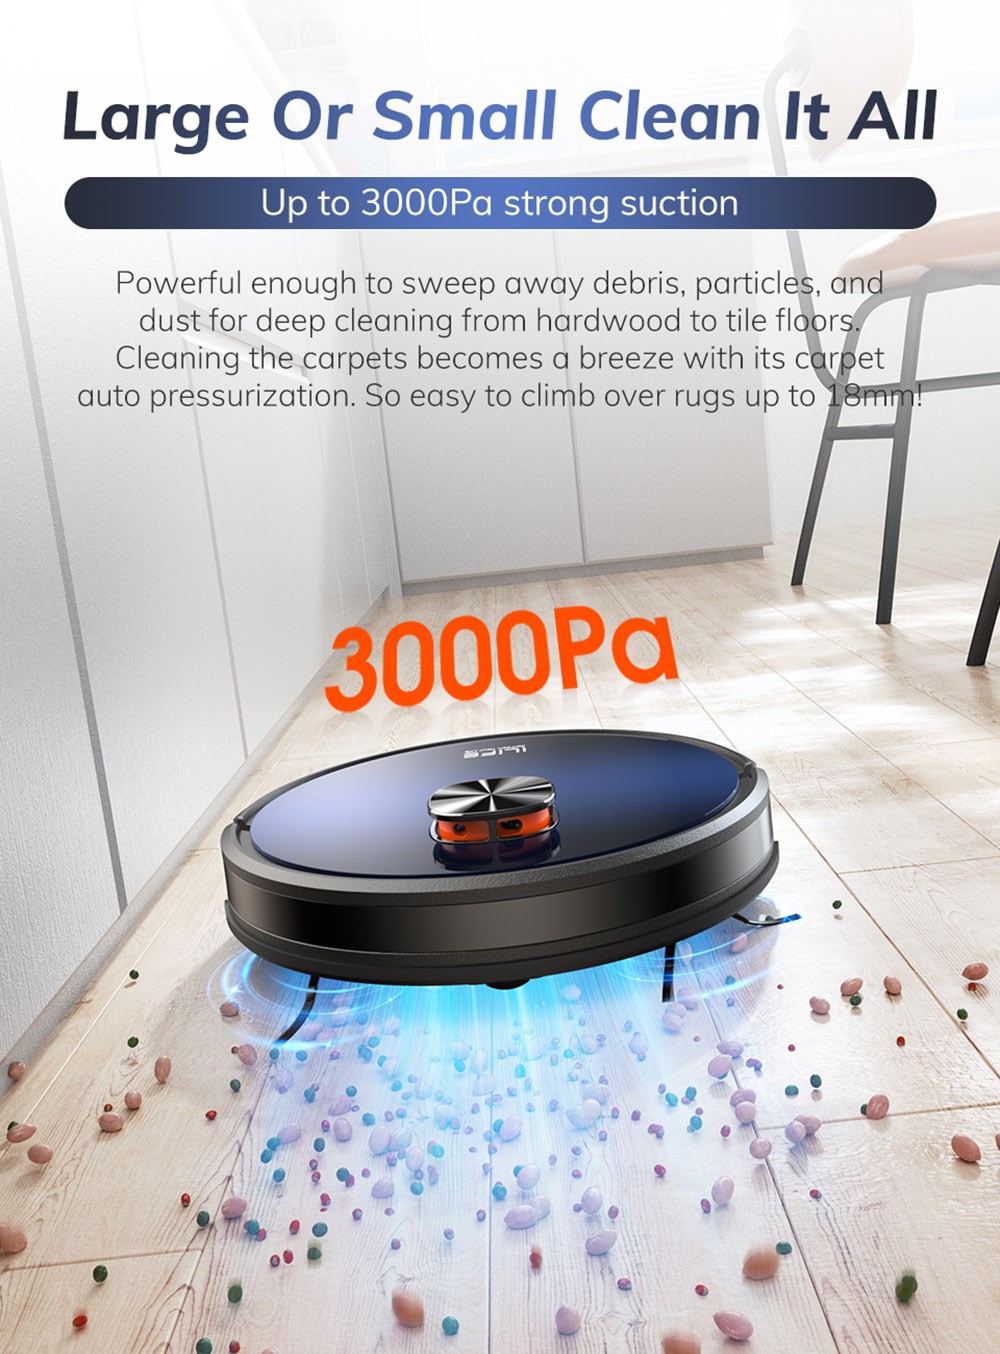 ILIFE T10s Robot Vacuum Cleaner, 2 in 1 Vacuum and Mop, Self-Emptying Station, 3000Pa Suction, 2.5L Dust Bag, LDS Navigation, 150 mins Runtime, Save up to 5 Maps, App & Voice Control - Gradient Blue